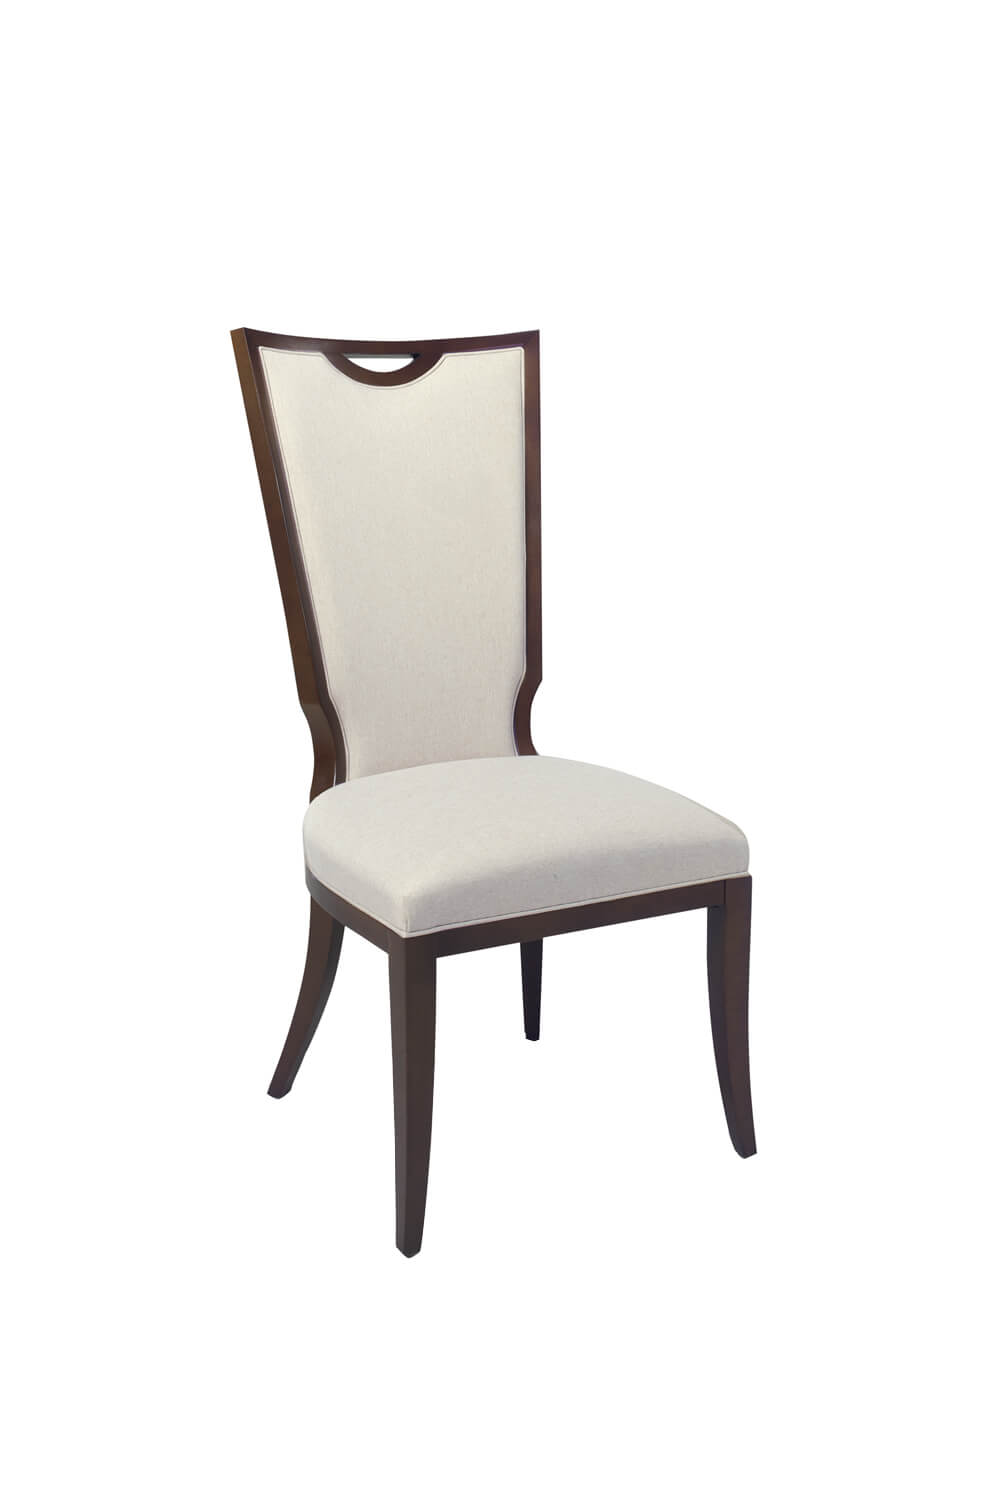 #1204 Transitional Upholstered Wood Dining Chair